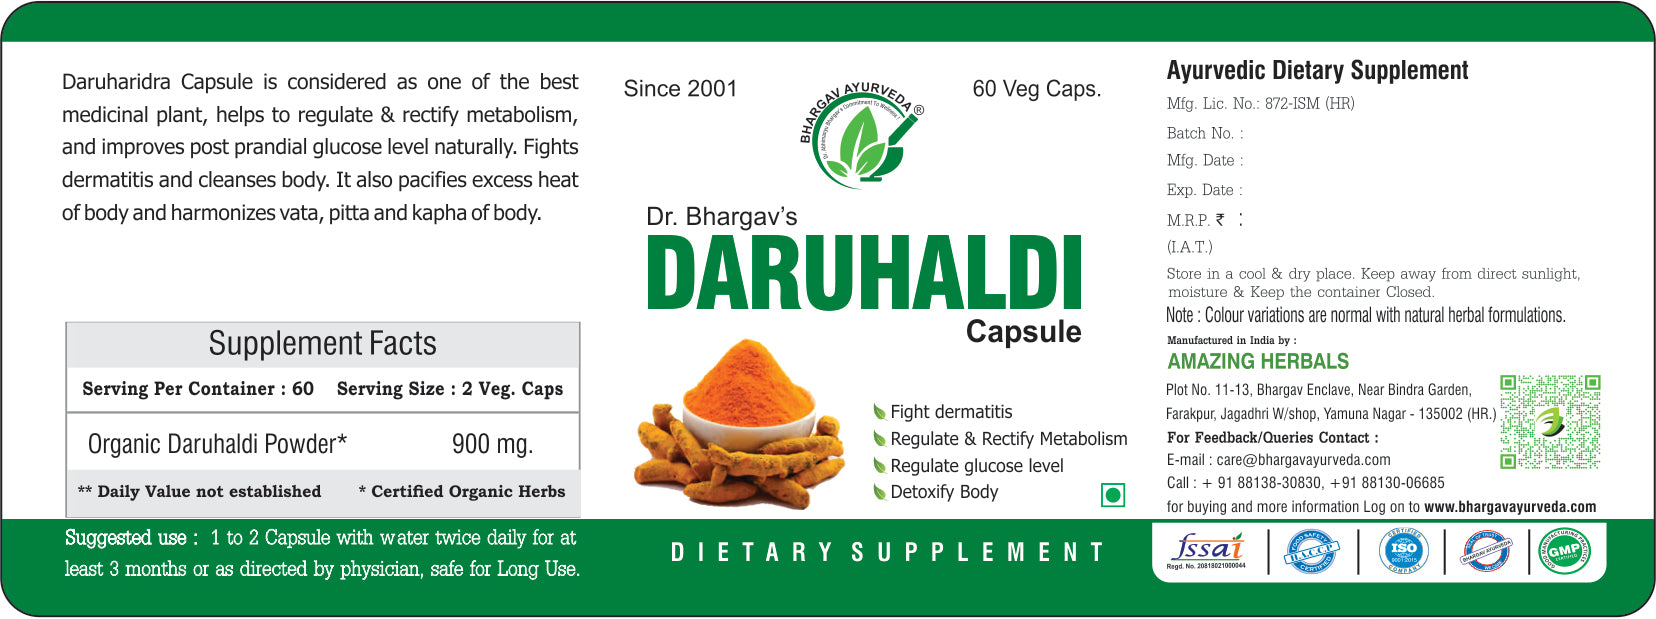 Dr. Bhargav’s Daruhaldi capsule | Regulate glucose level | Detoxify Body | Fights skin allergy | Regulate & Rectify Metabolism |Pacify excess body heat and prevent loose motion| Anti allergic and Anti Bacterial properties |Support sugar metabolism | 60 Ve